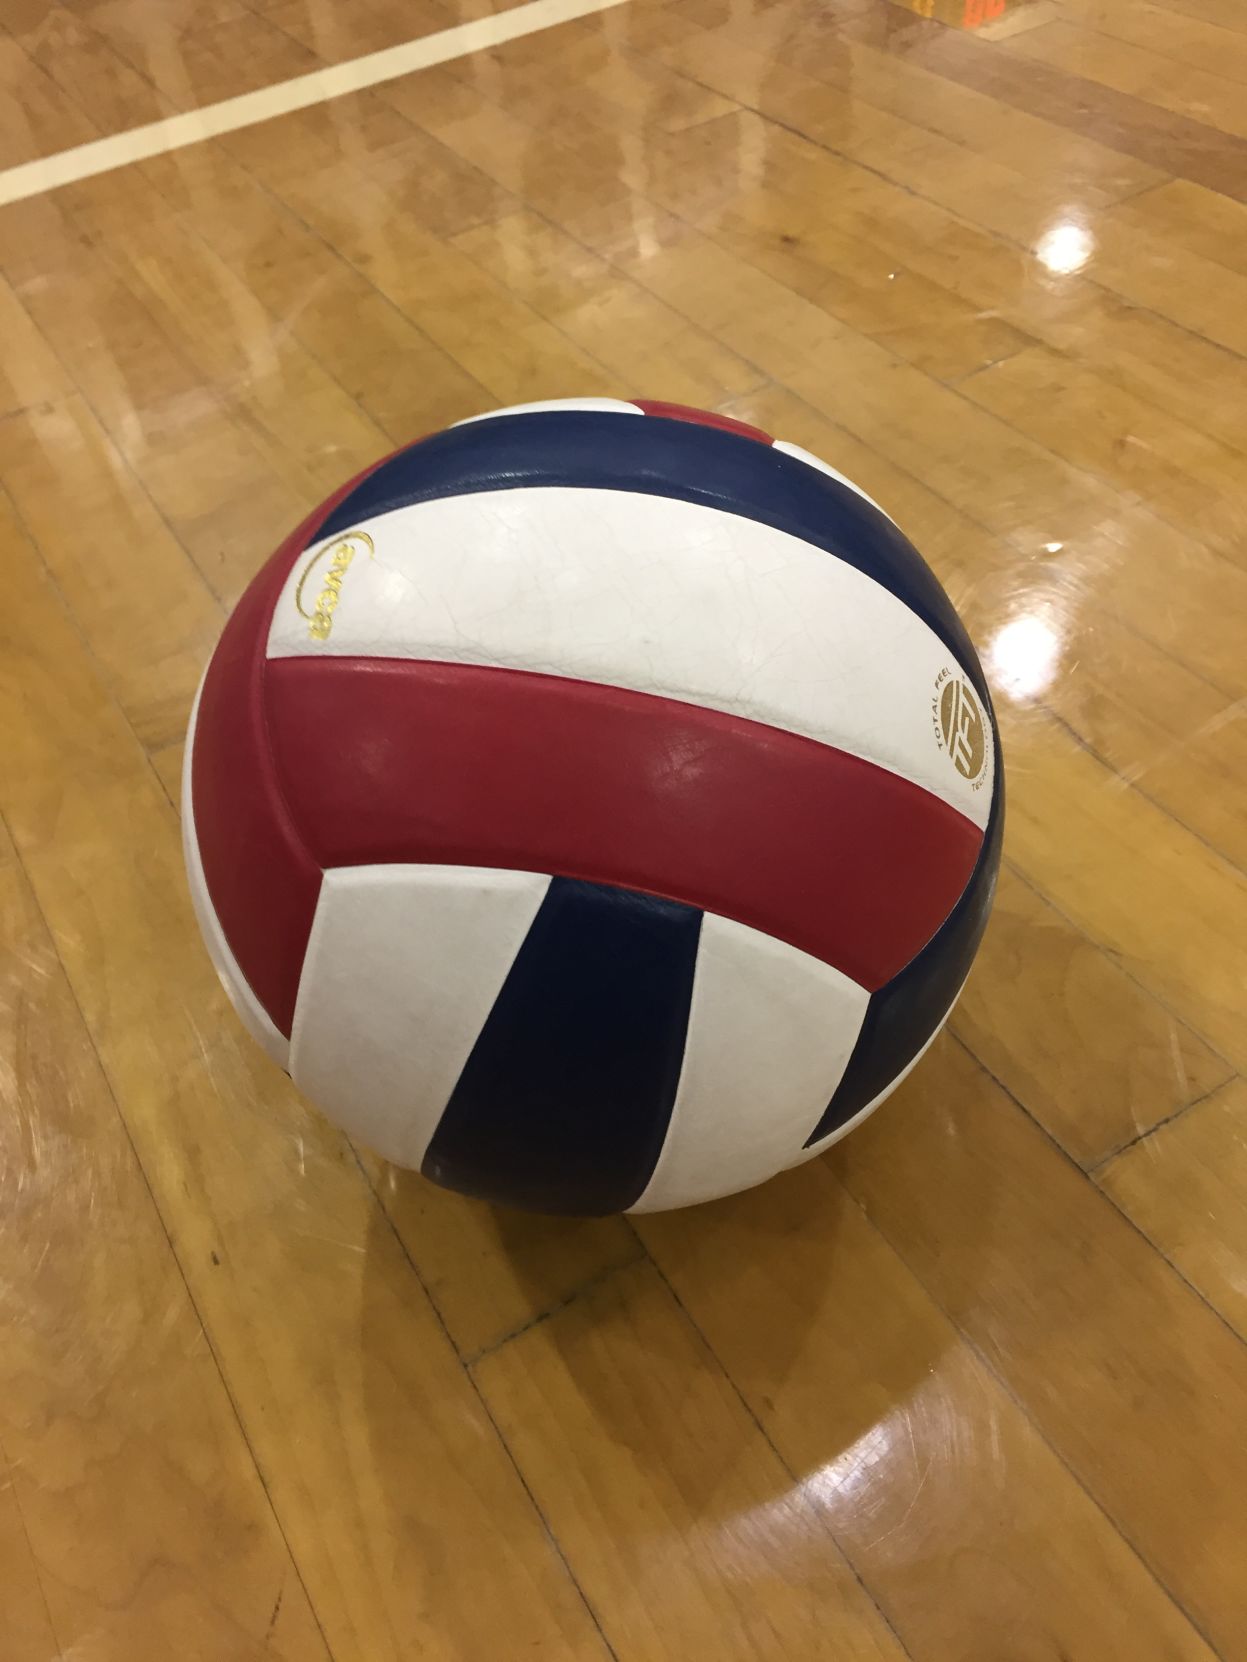 Forest Hills travels to DuBois to begin District 6-9 boys volleyball playoffs